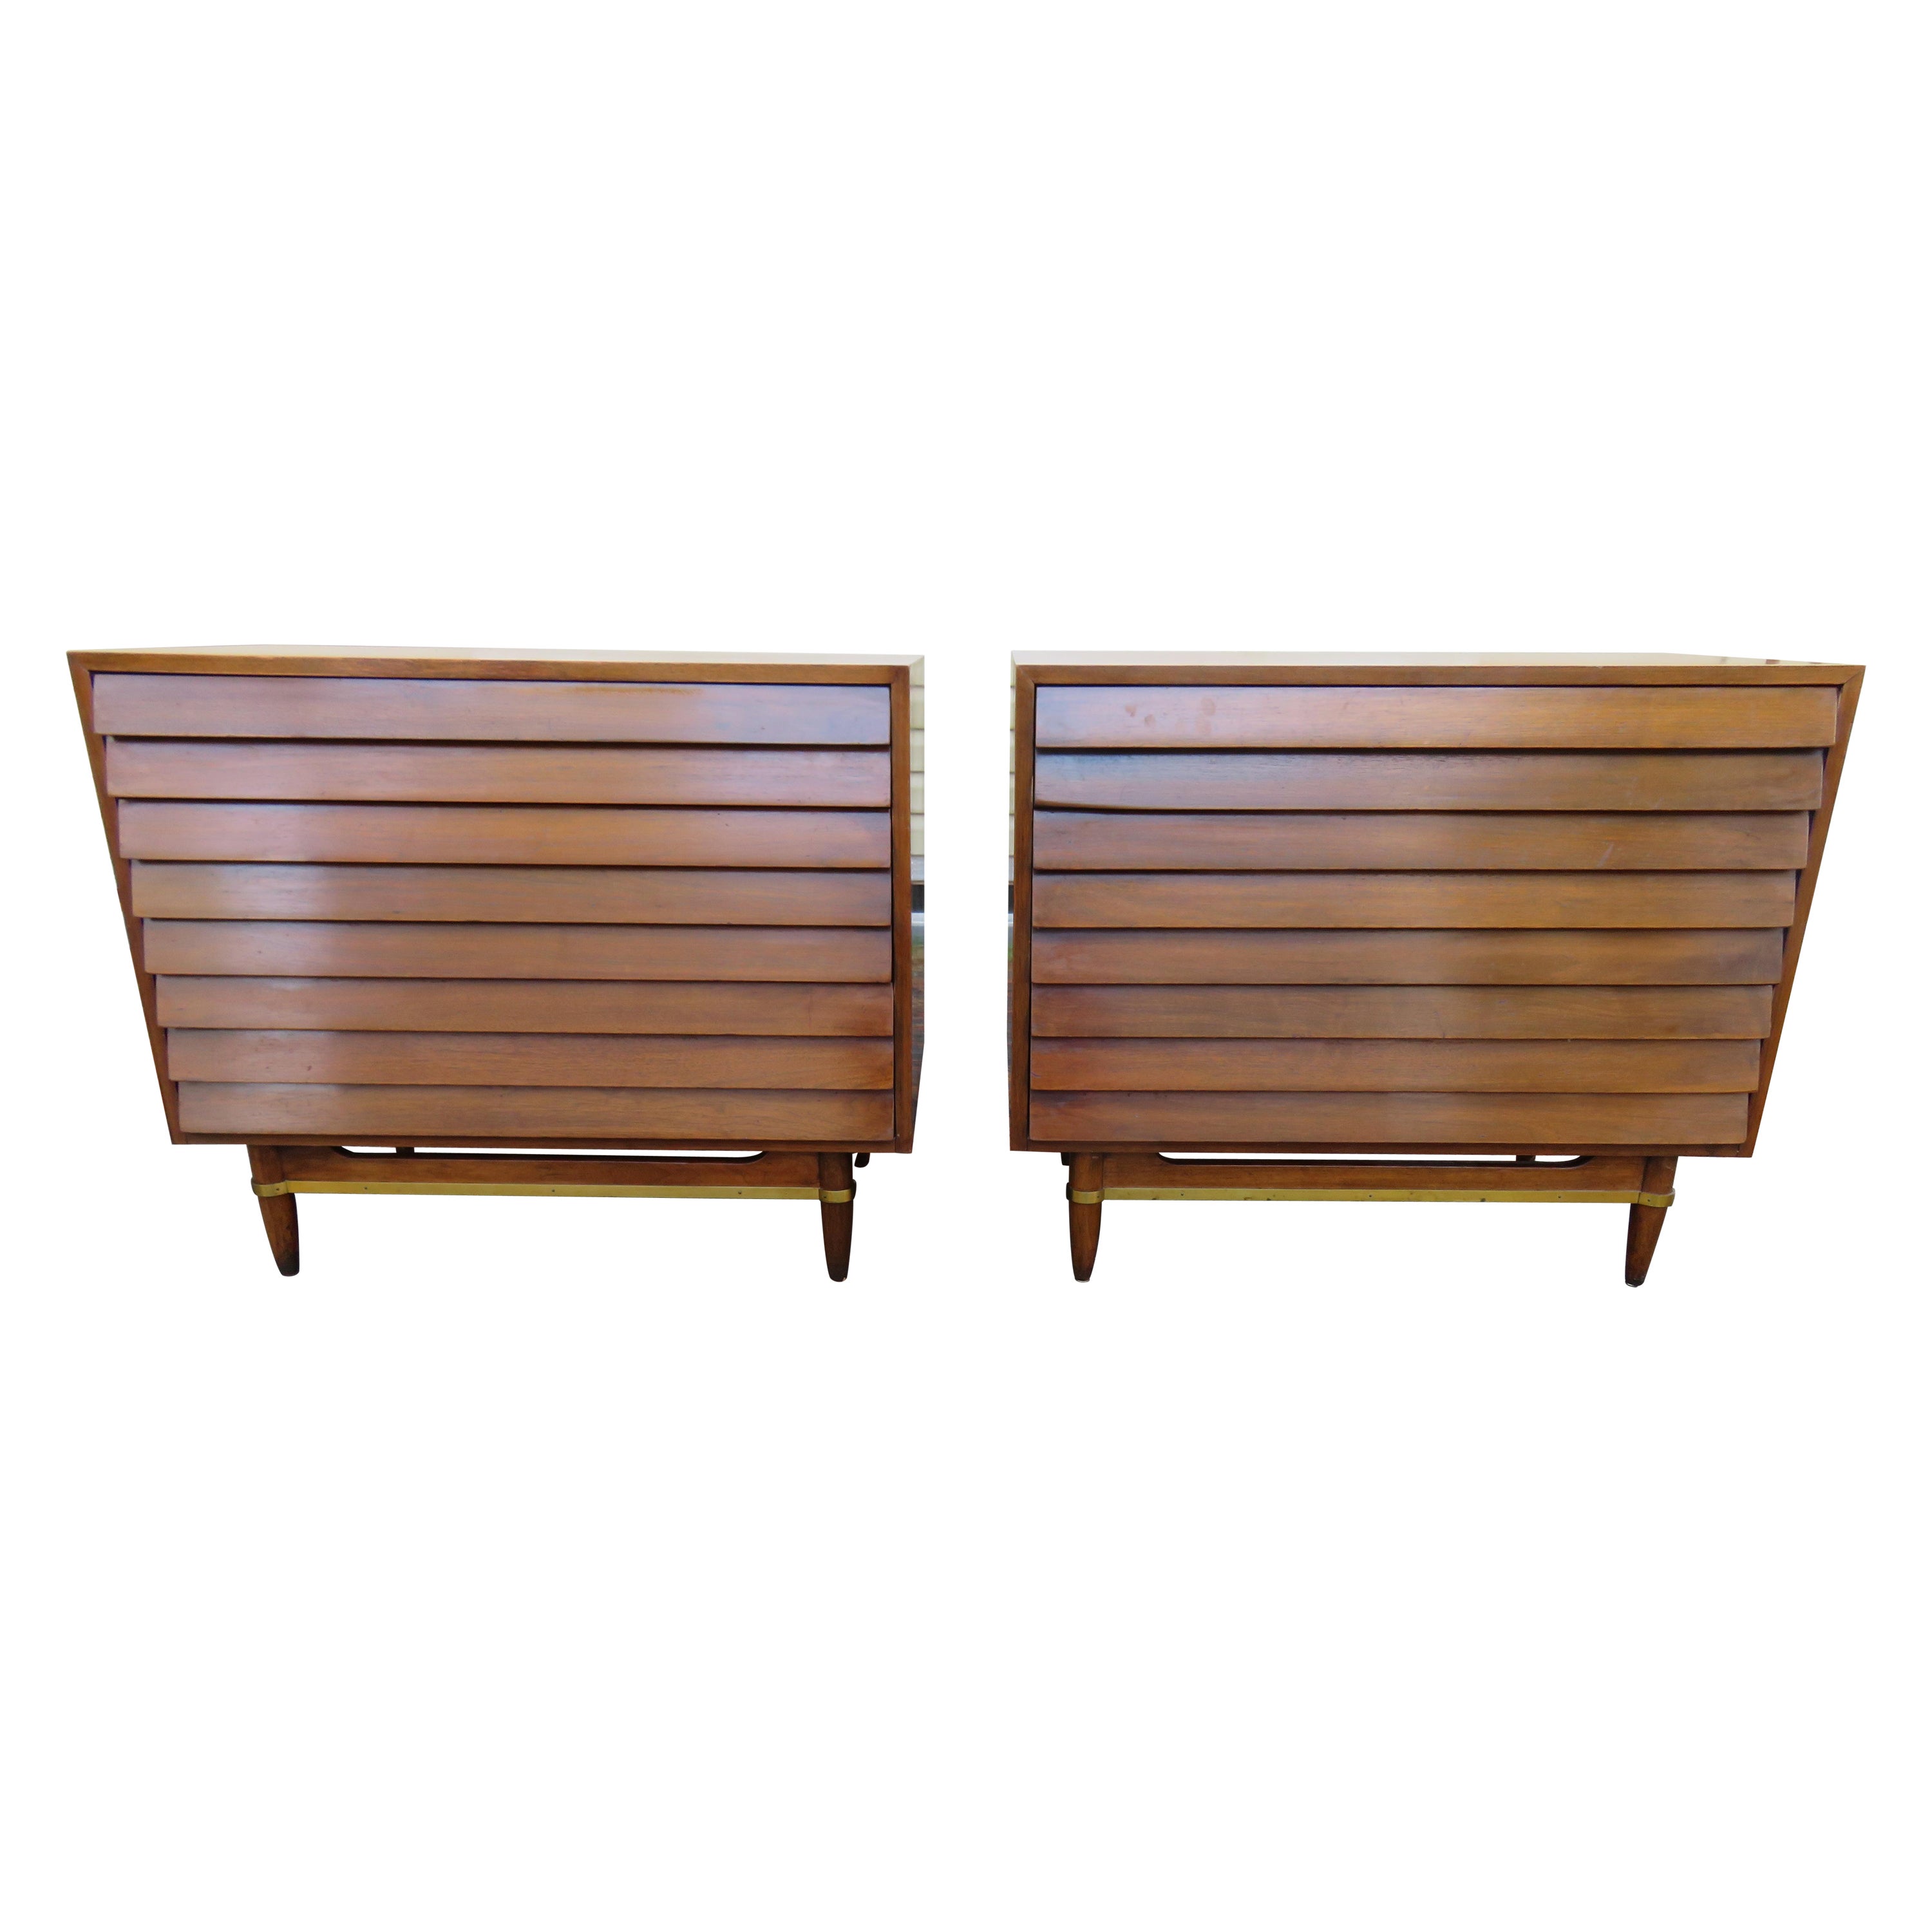 Stunning Pair of American of Martinsville Walnut Brass Louvered Bachelors Chests For Sale